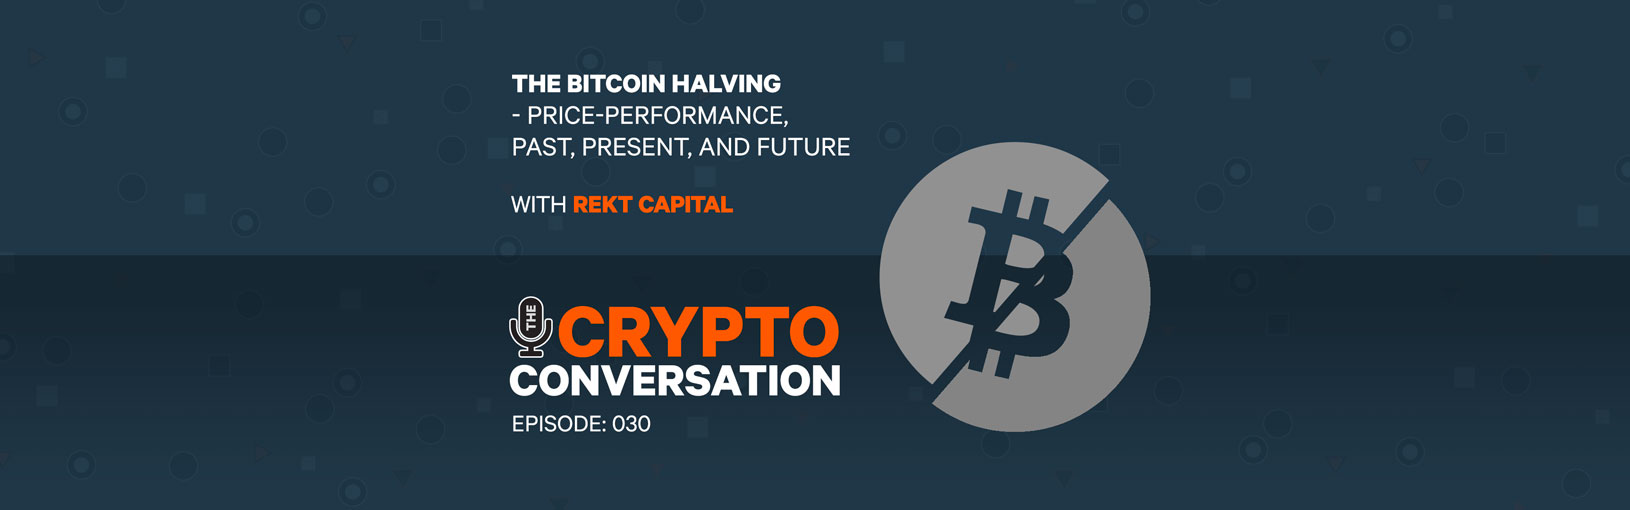 The Bitcoin Halving – price-performance, past, present, & future with Rekt Capital